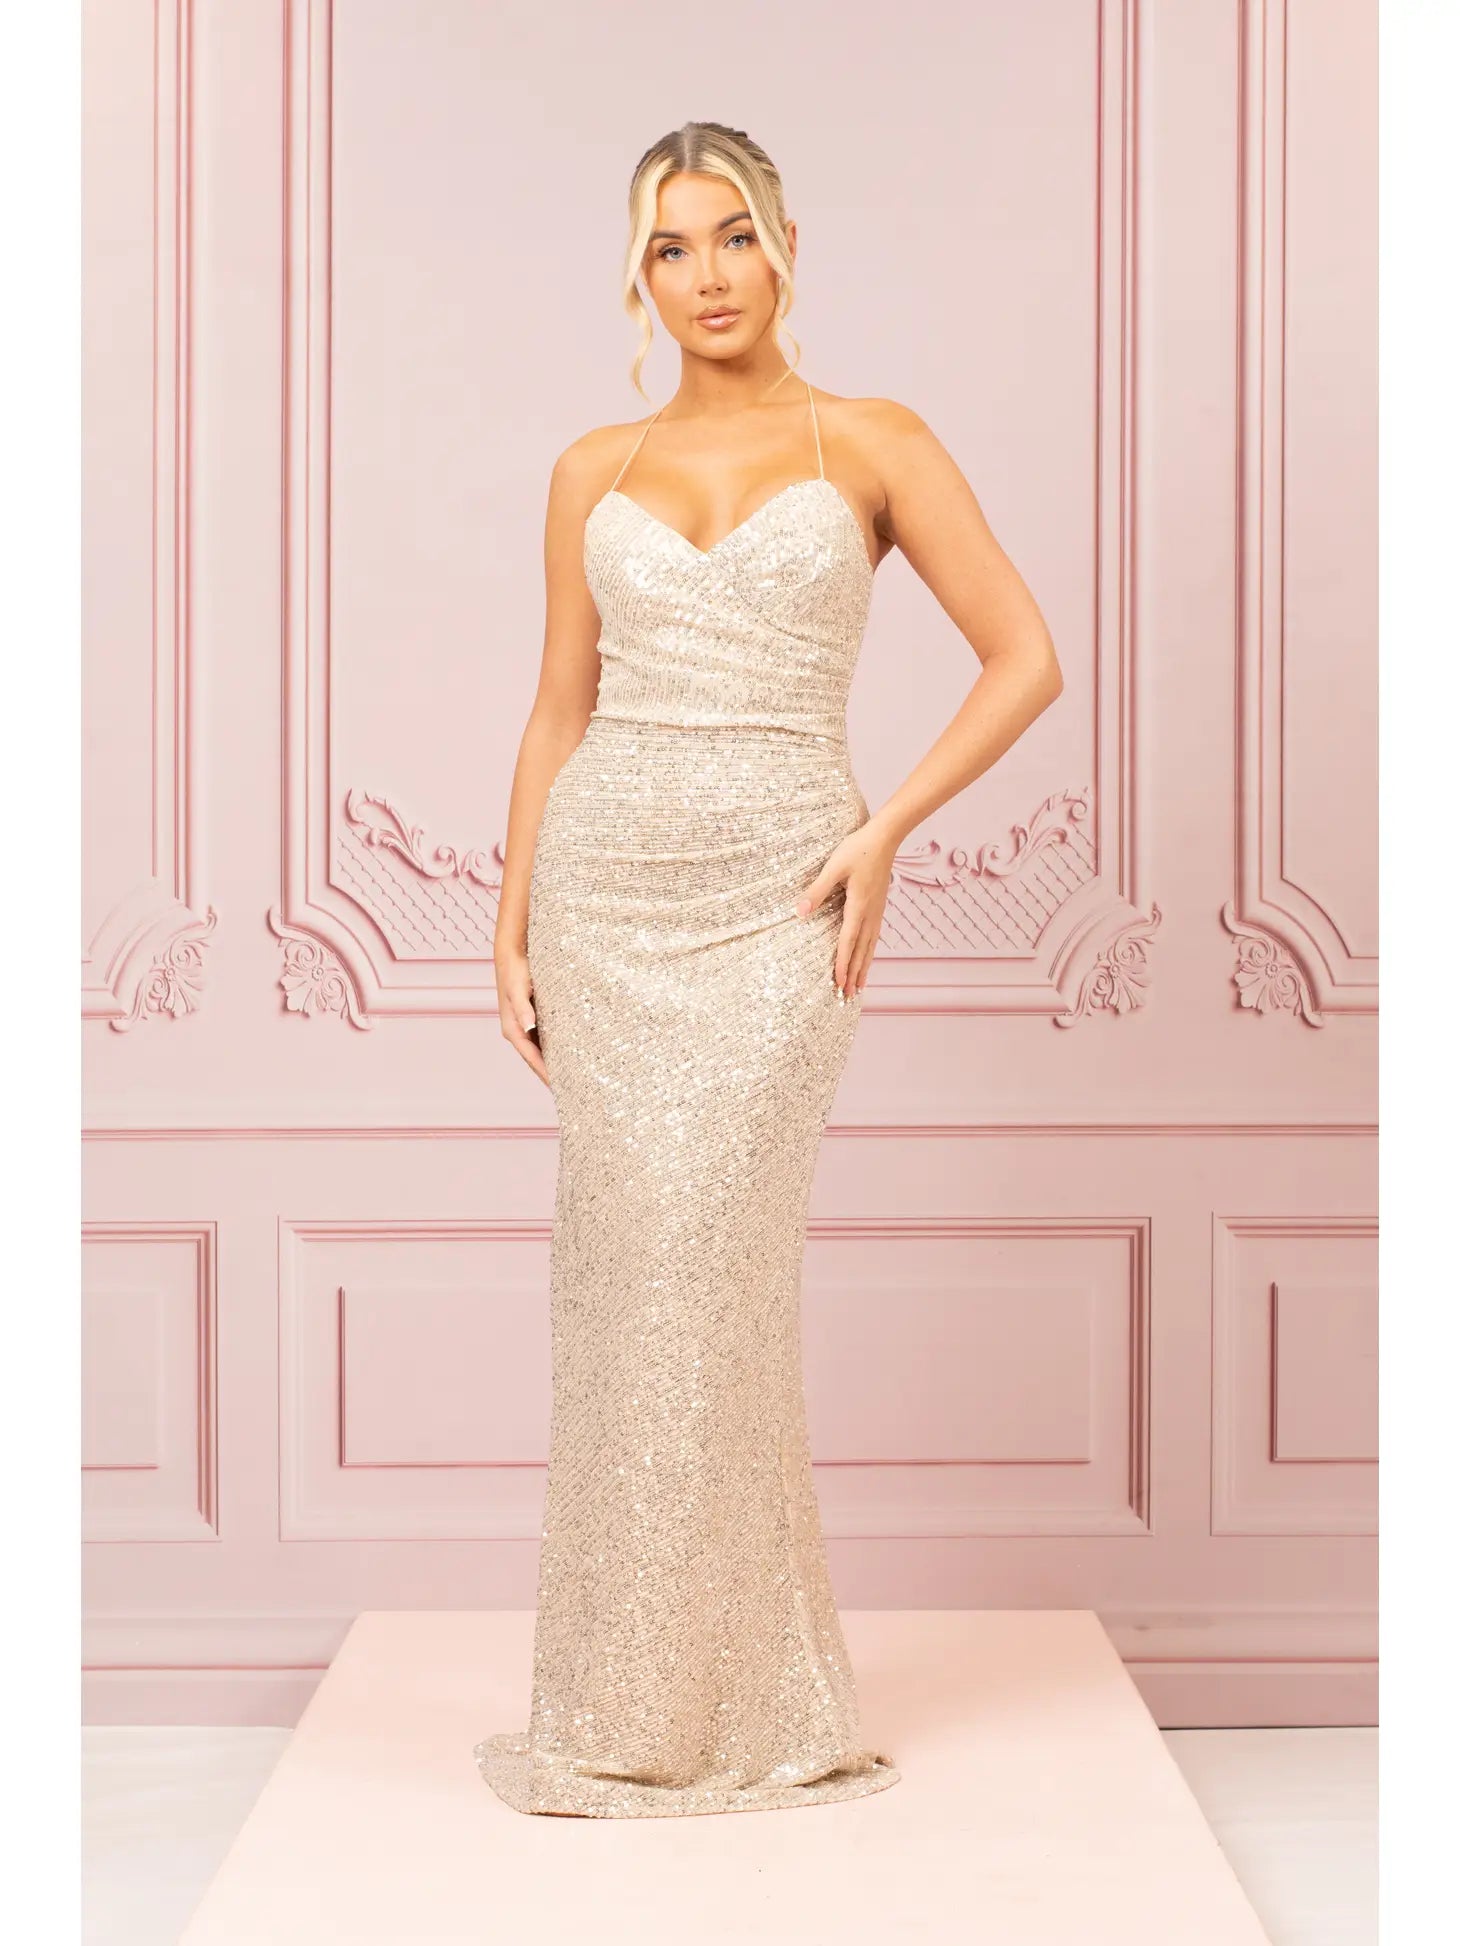 Shimmery Champagne Dress